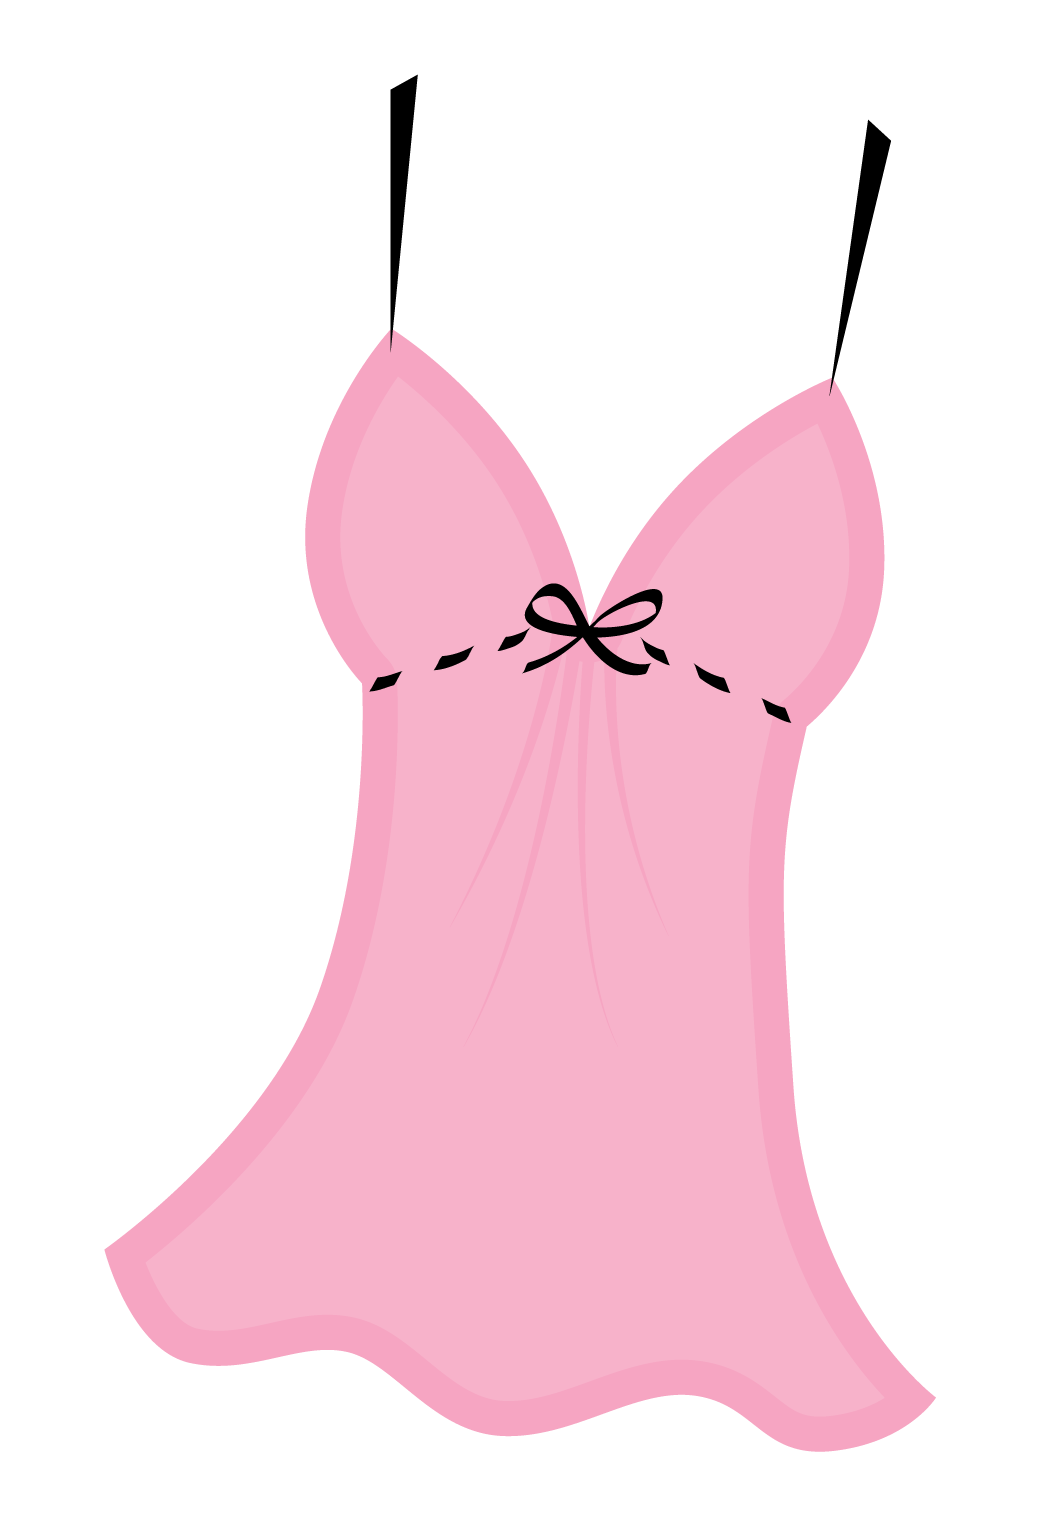 nightgown clipart - photo #33